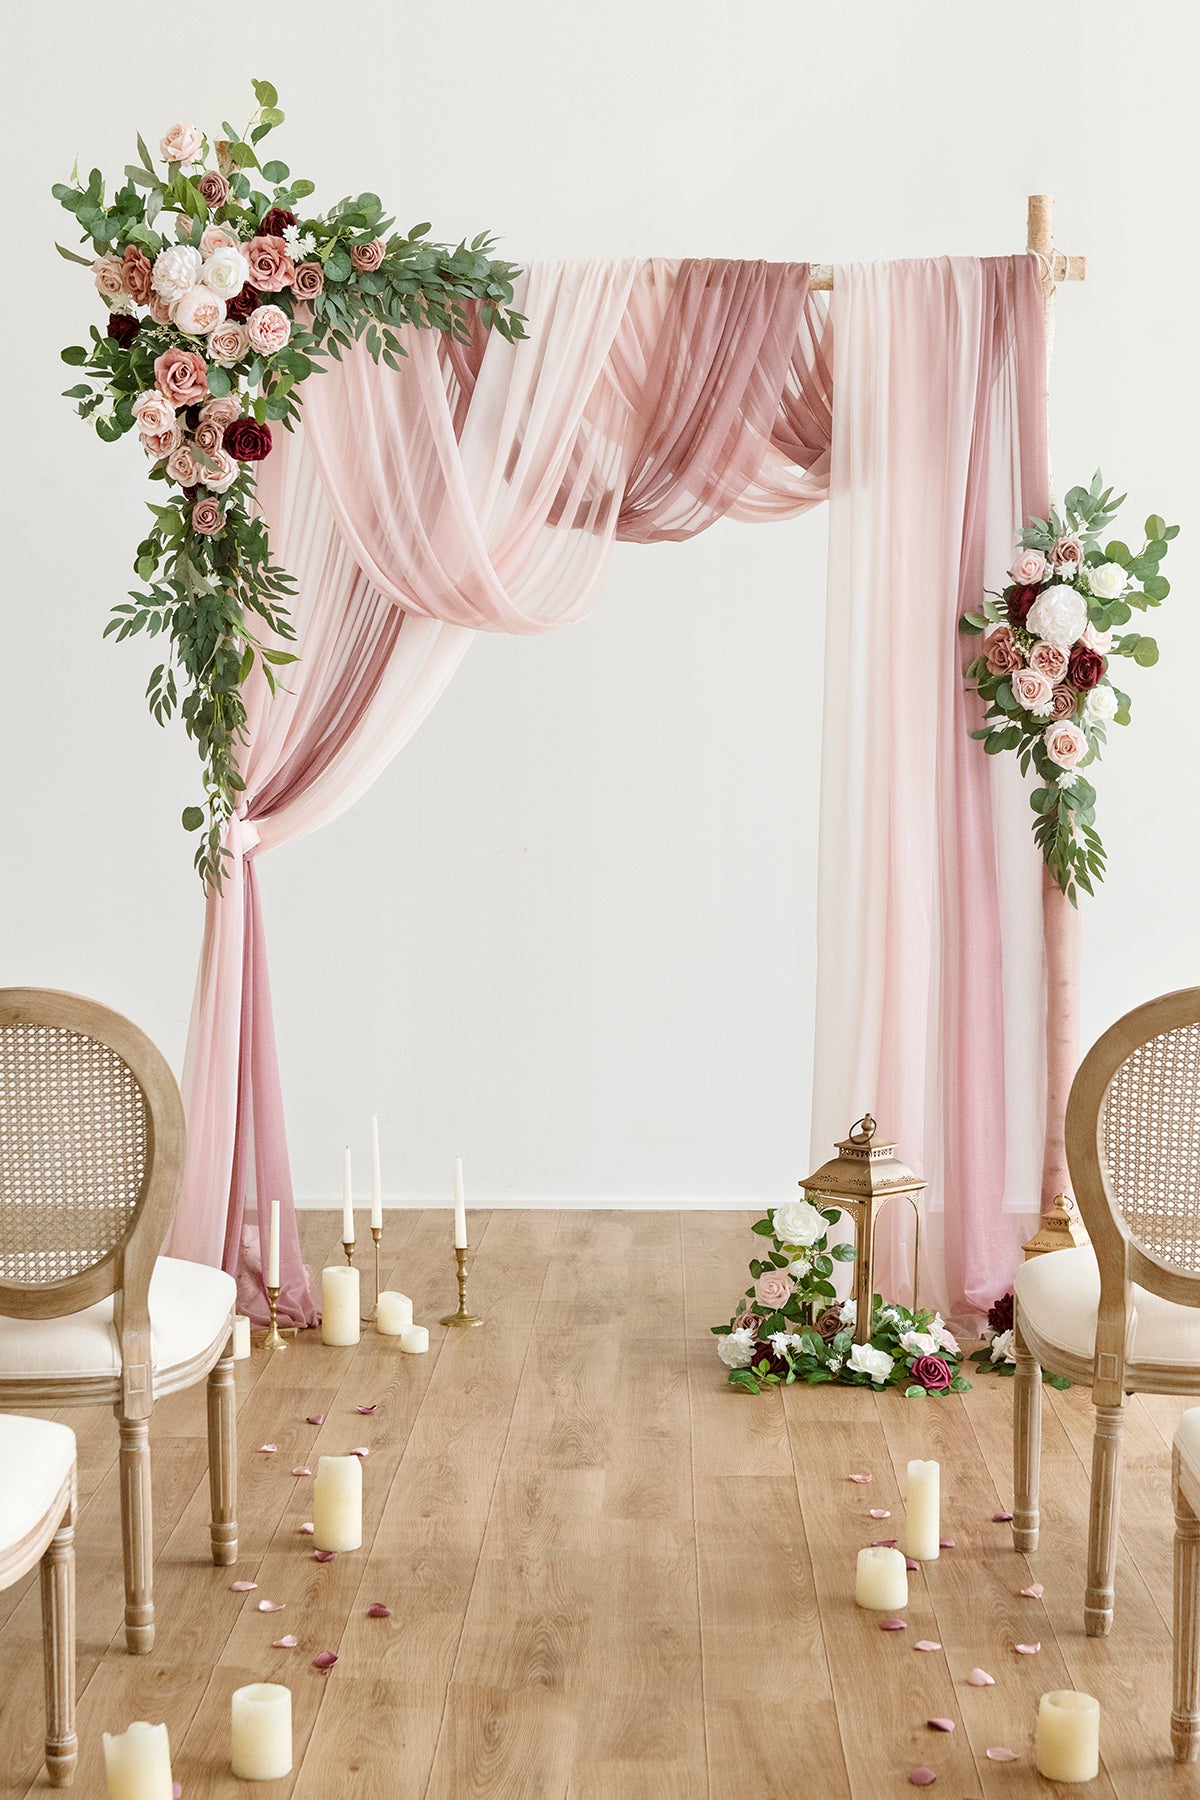 Wedding Arch Flowers  Flower Arch Decor with Drapes - Dusty Rose &  Burgundy – Ling's Moment